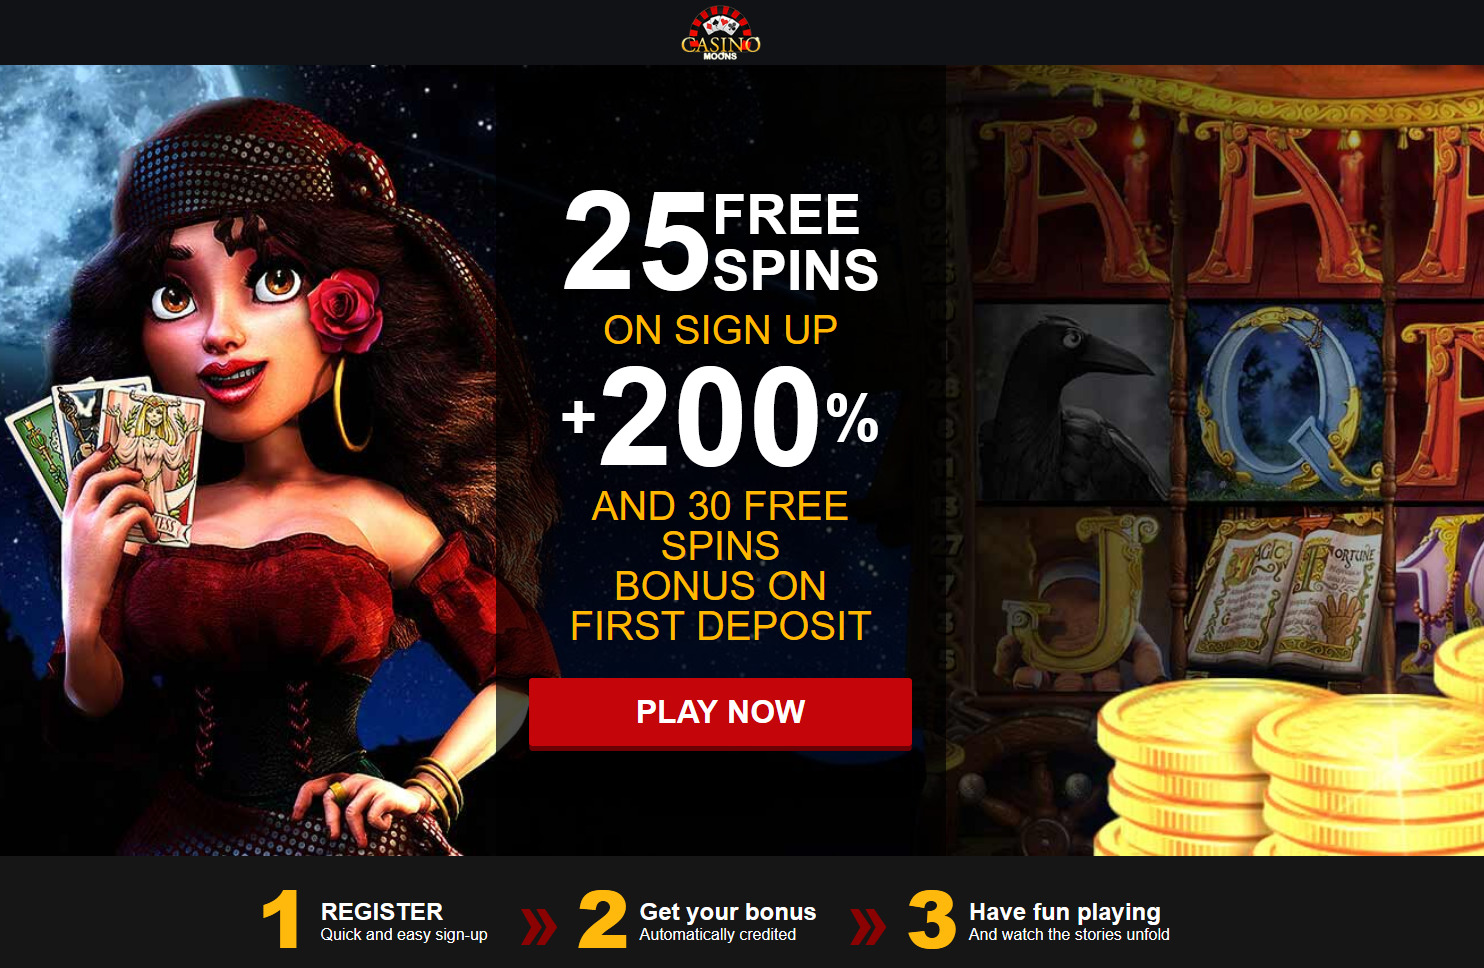 25 FREE SPINS
                                ON SIGN UP + 200 % AND 30 FREE SPINS
                                BONUS ON FIRST DEPOSIT